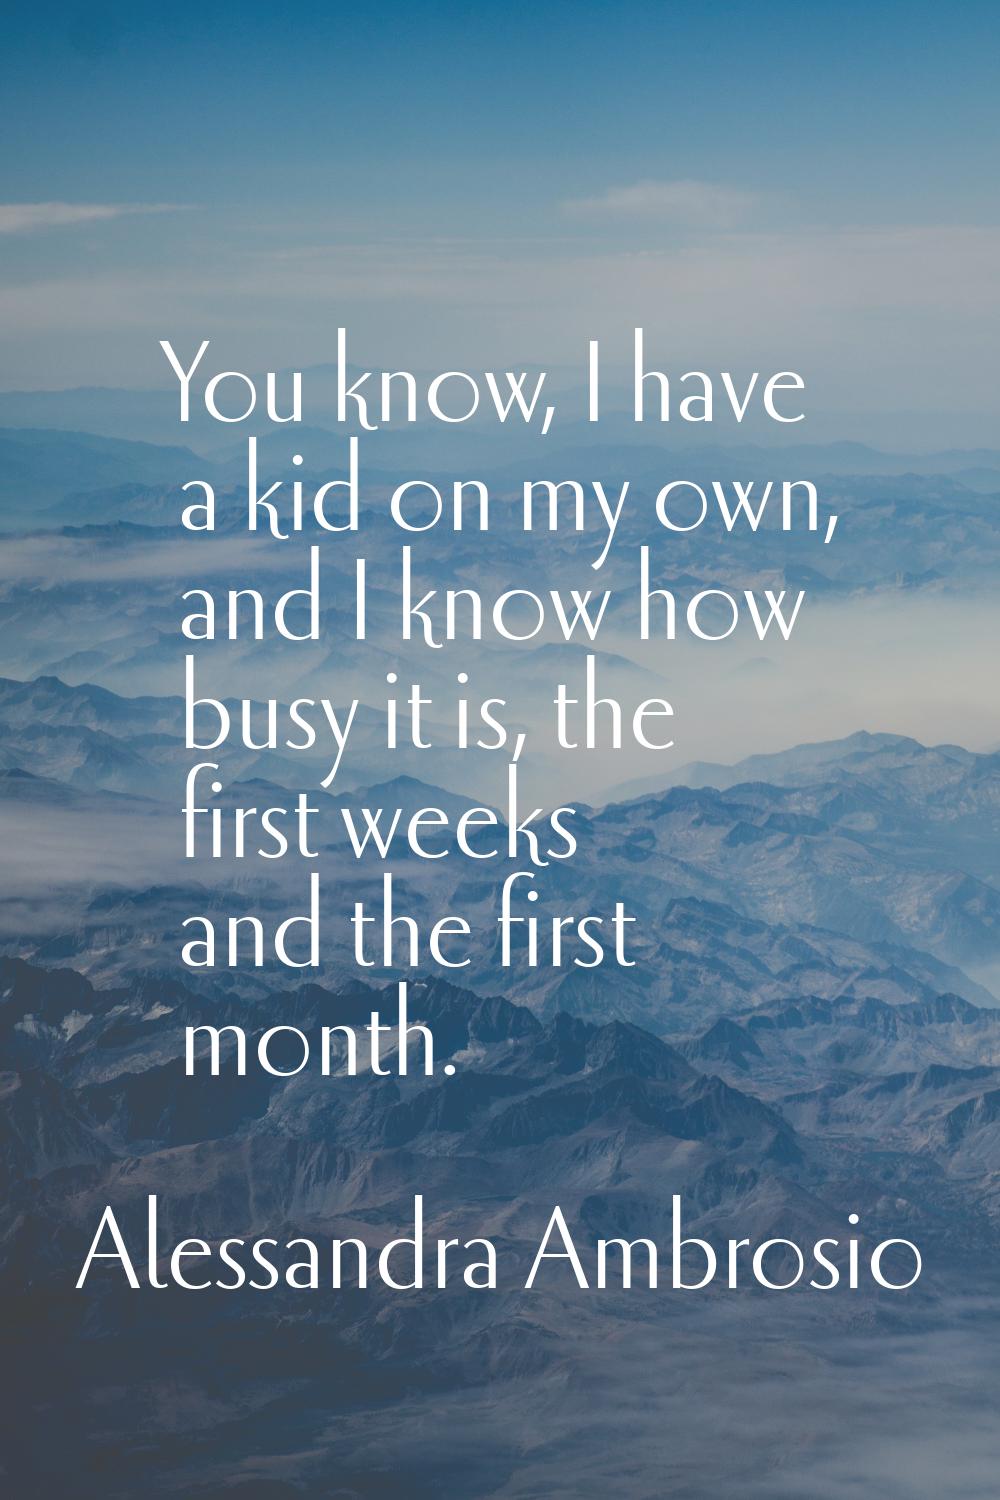 You know, I have a kid on my own, and I know how busy it is, the first weeks and the first month.